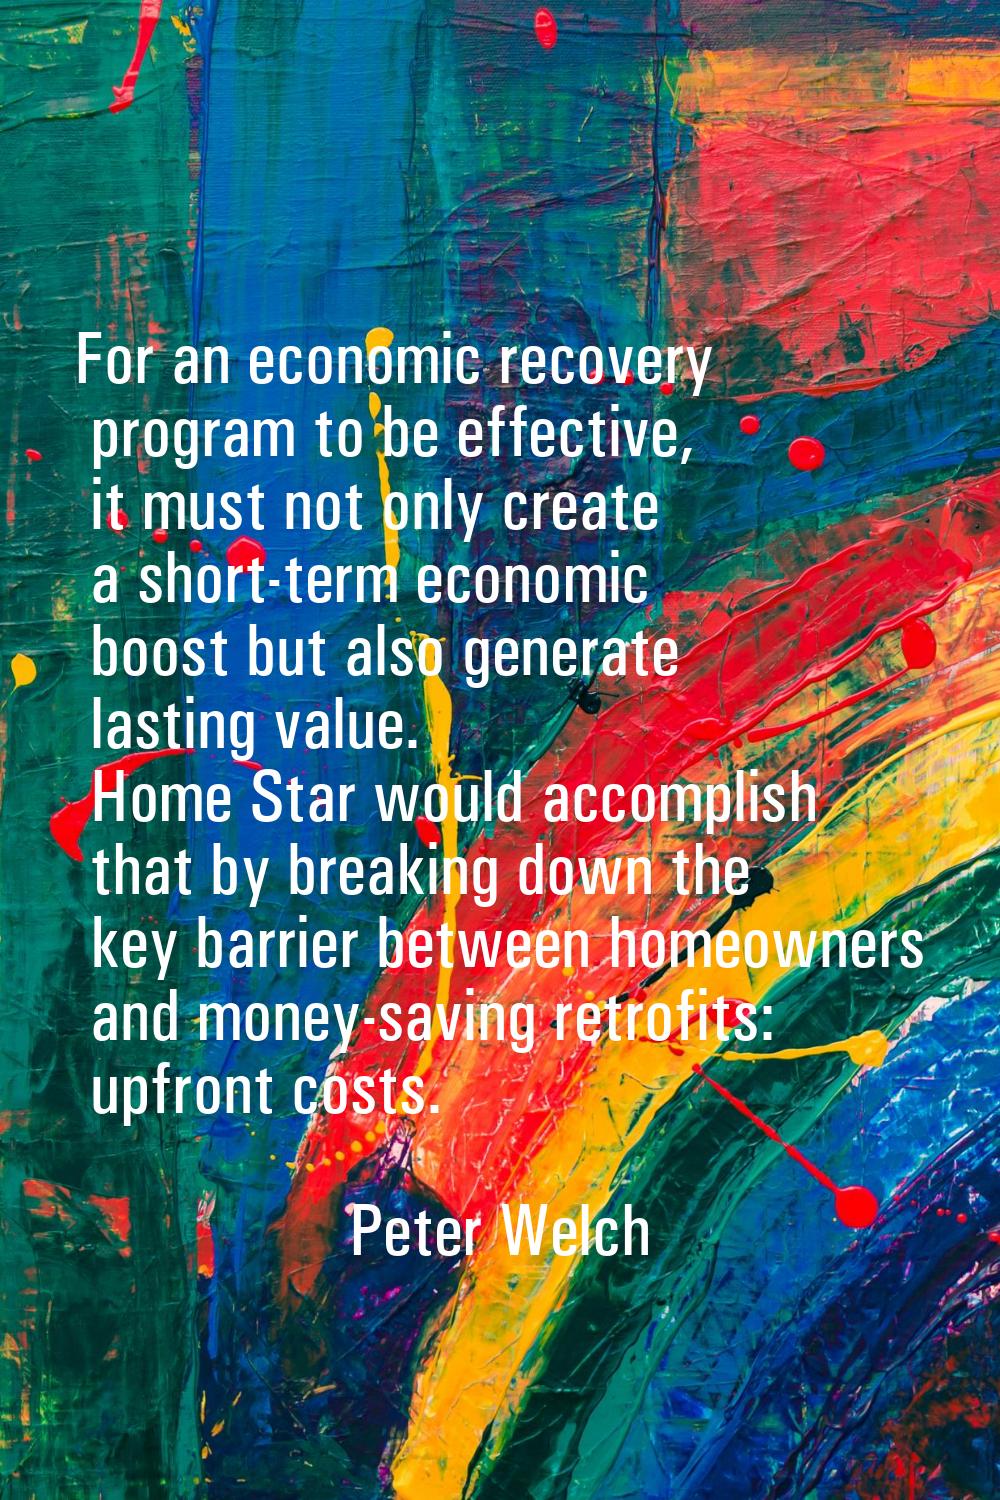 For an economic recovery program to be effective, it must not only create a short-term economic boo